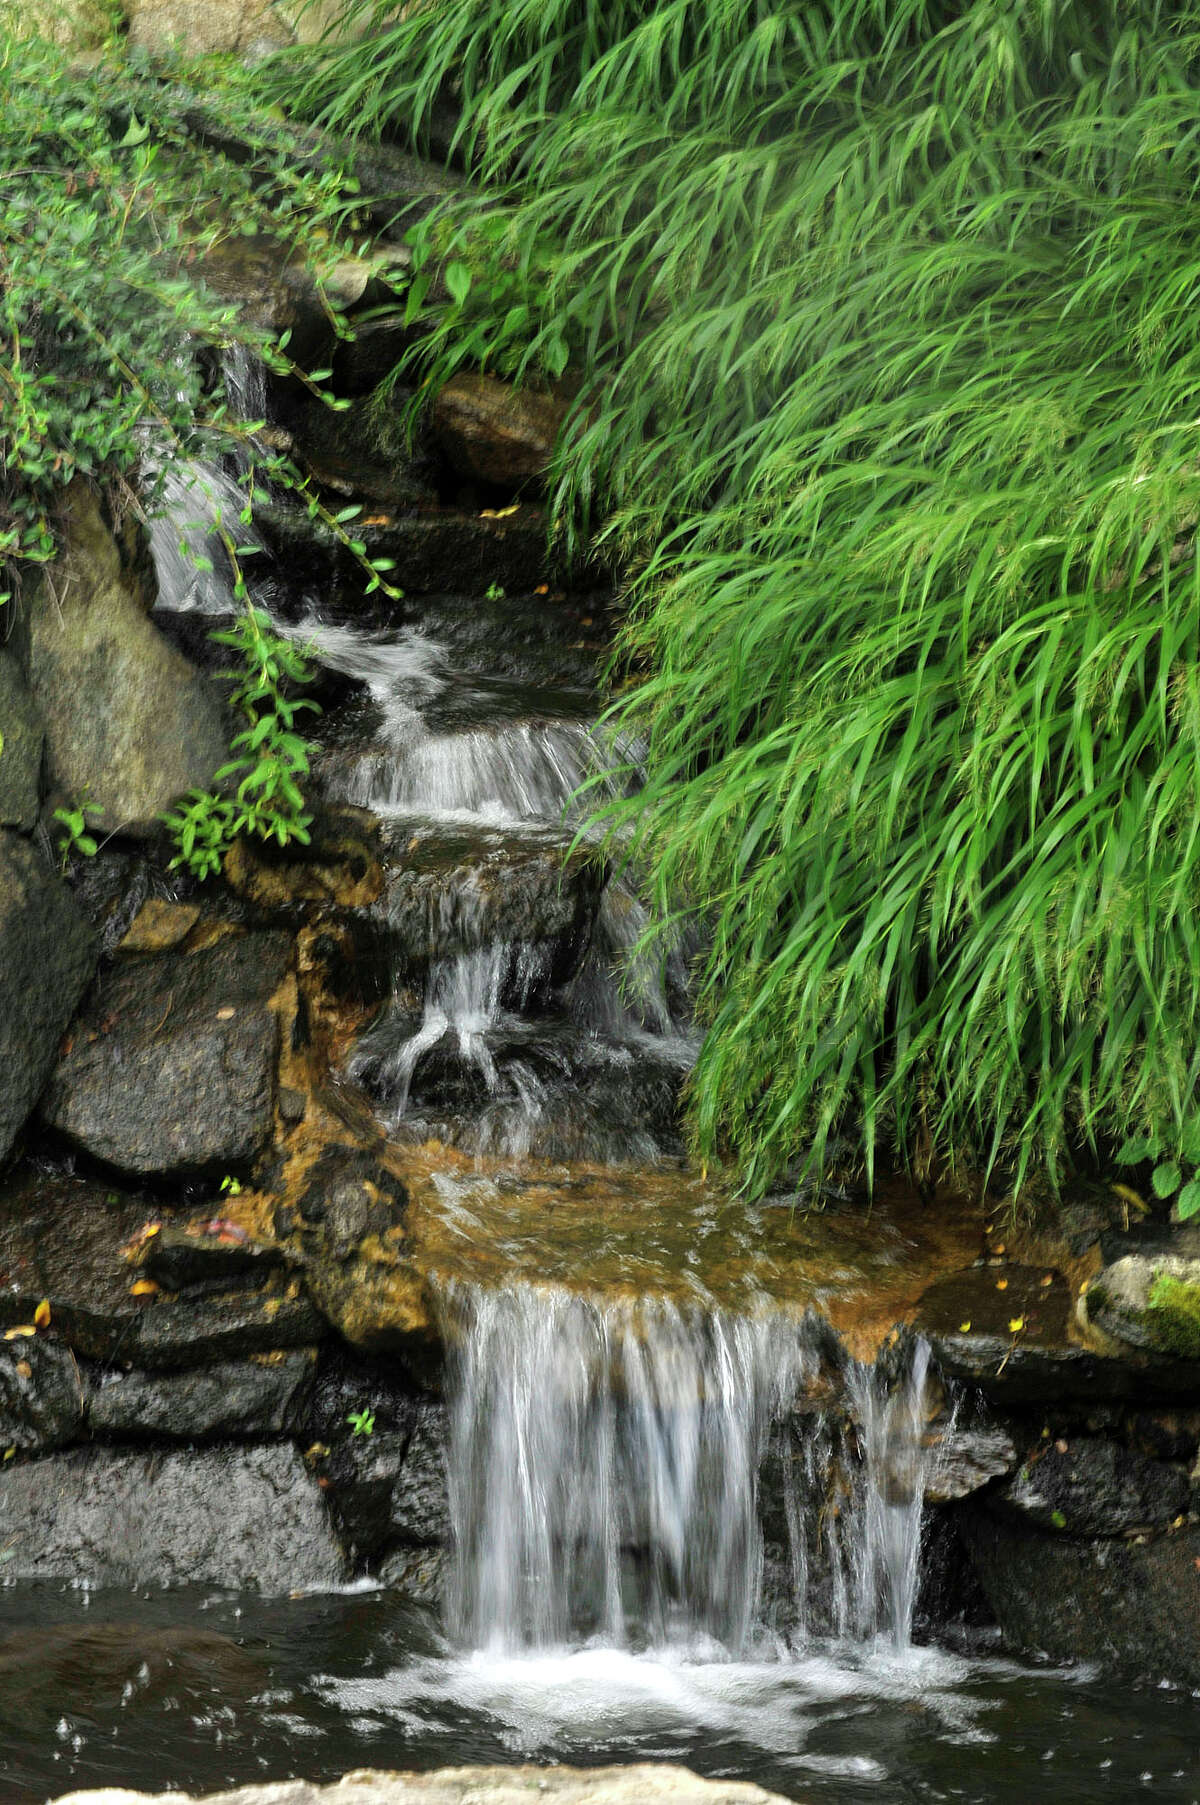 A man-made waterfall is seen at Exquisite Environments in Stamford, Conn., on Sunday, Sept. 14, 2014.